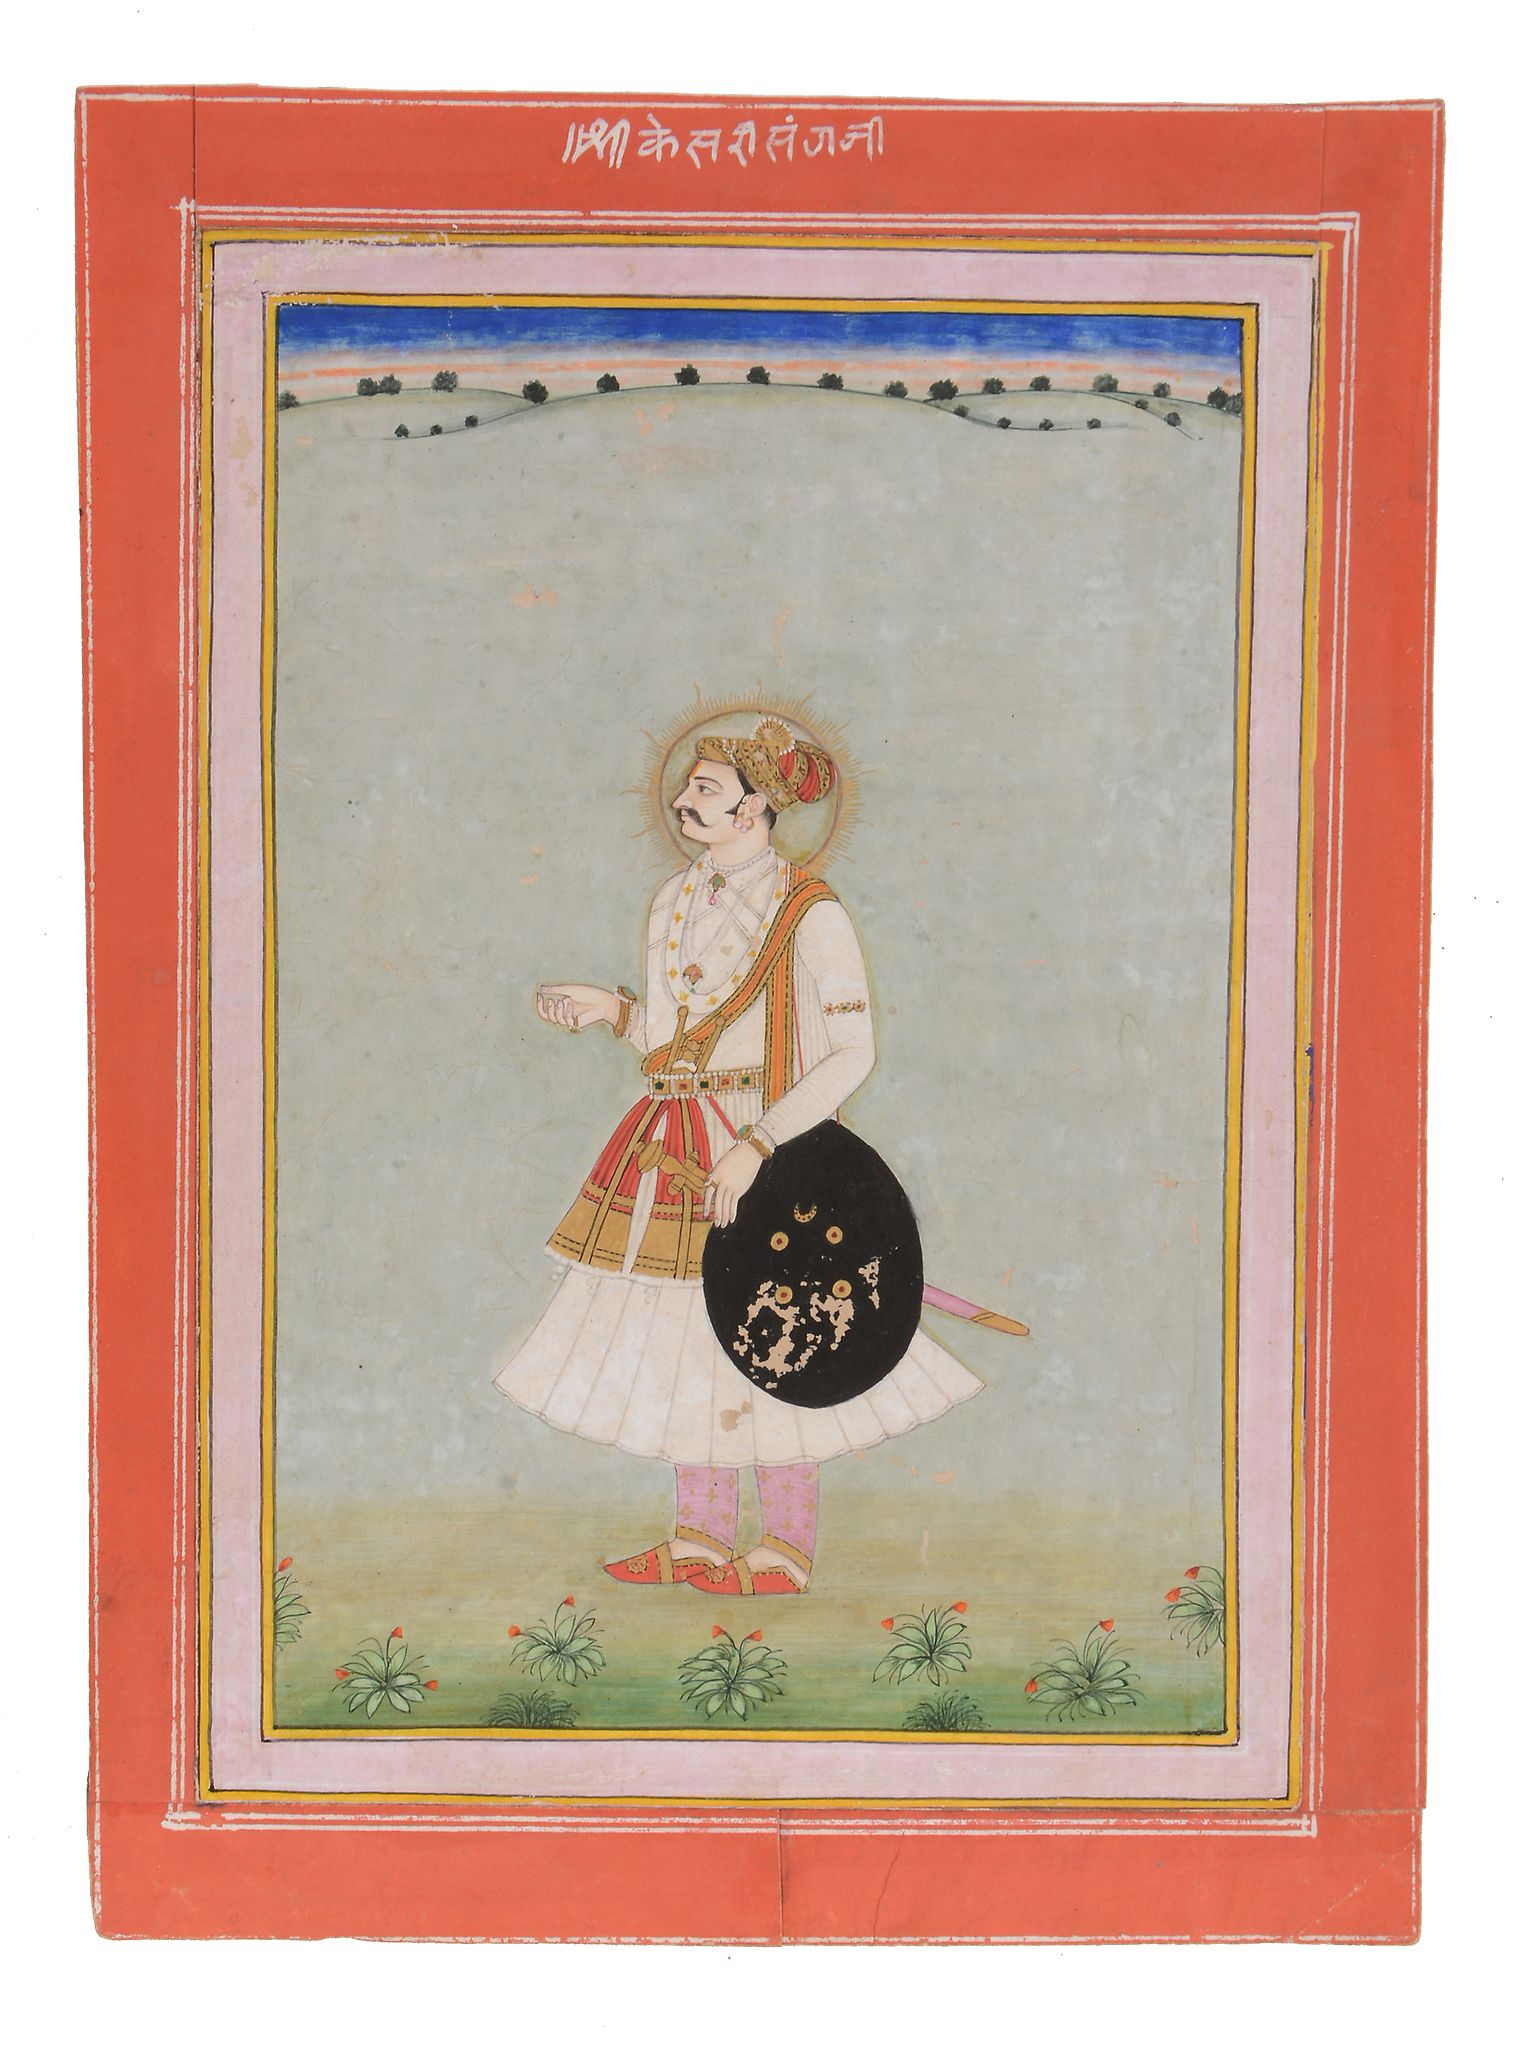 Three Indian portraits of rulers, Mewar, South Western Rajasthan, late 18th or 19th century, each - Image 3 of 3